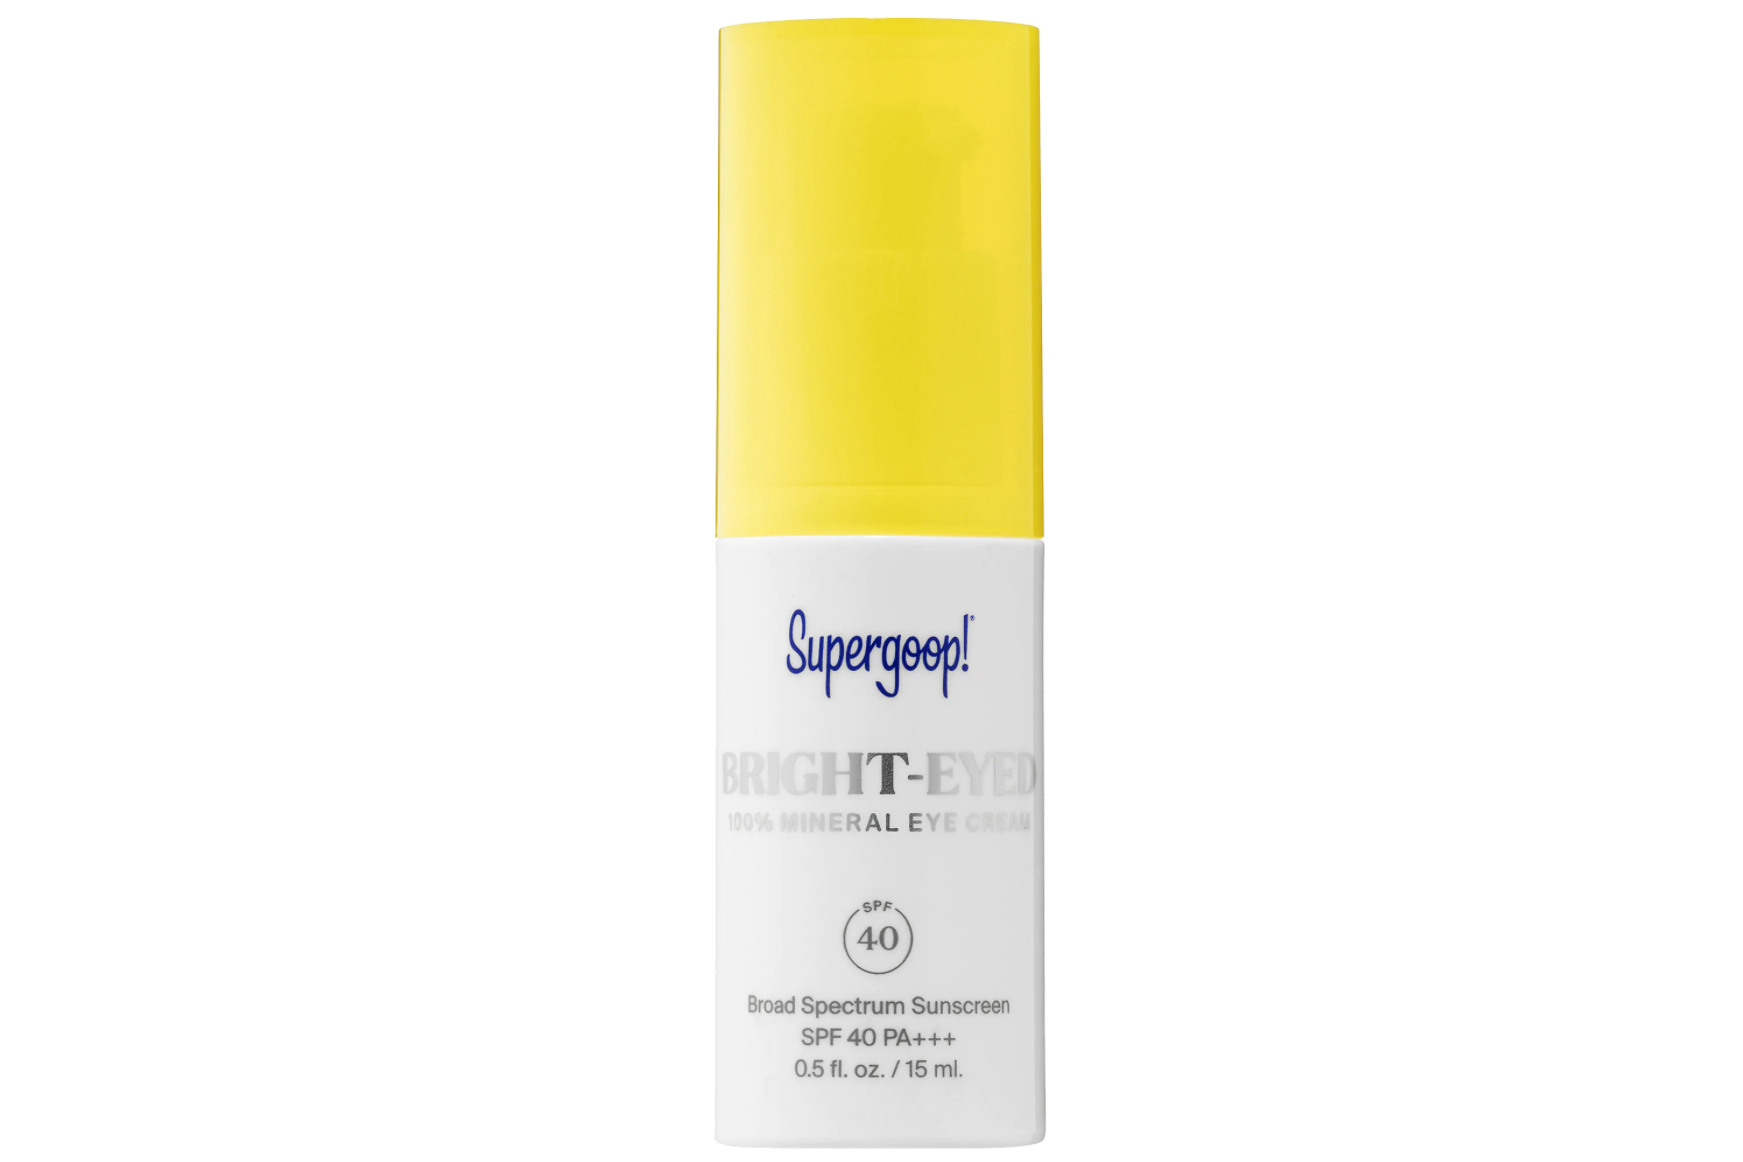 supergoop bright eyed 100% mineral eye cream spf 40 review